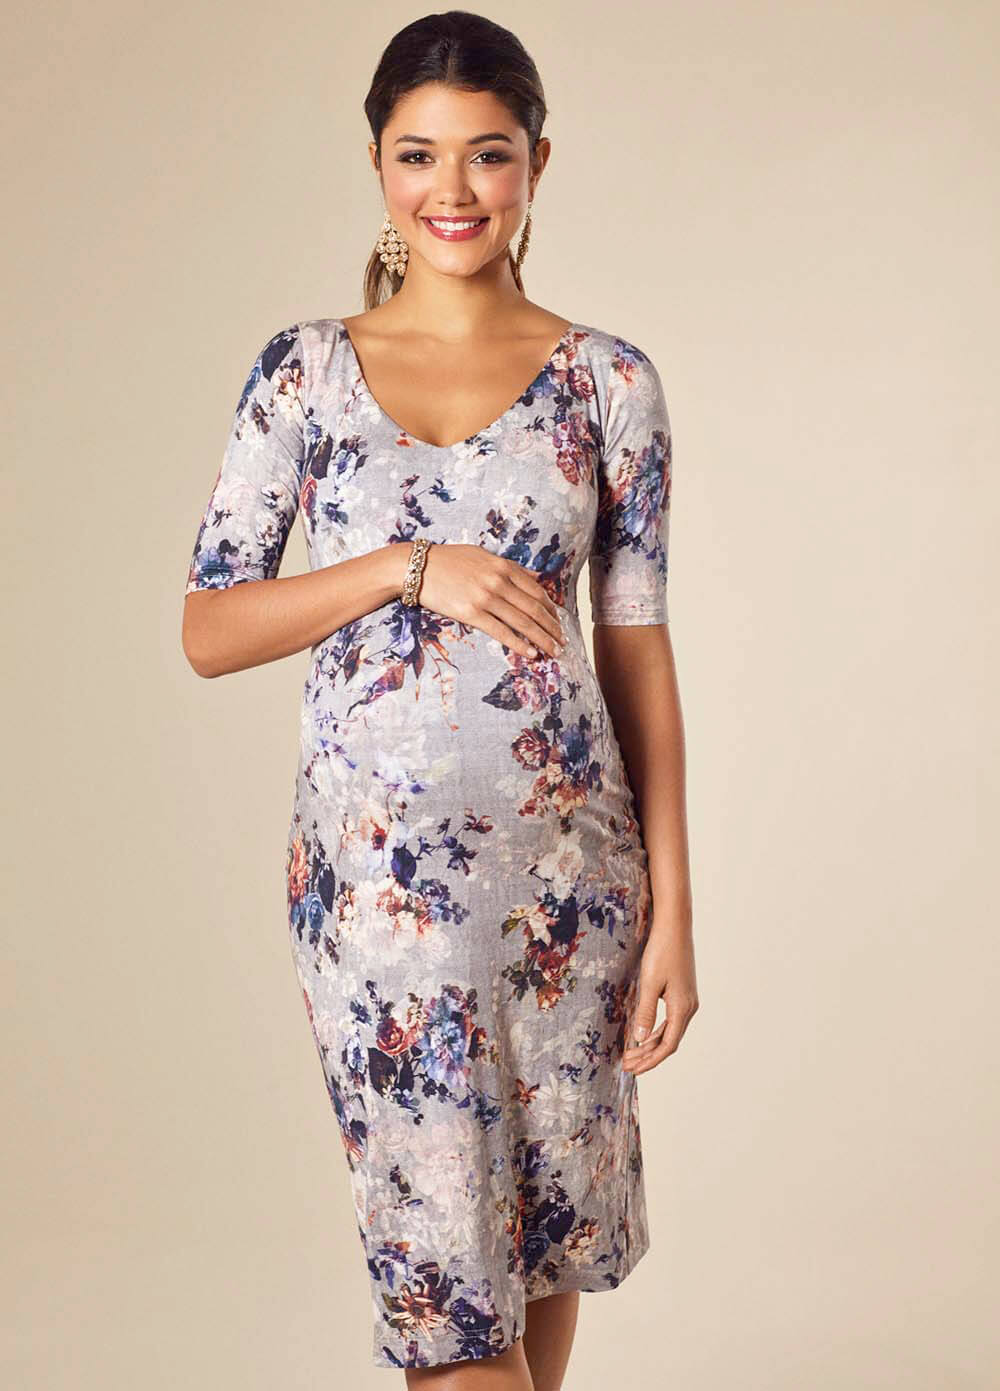 Tilly Maternity Shift Dress in Vintage Bloom by Tiffany Rose